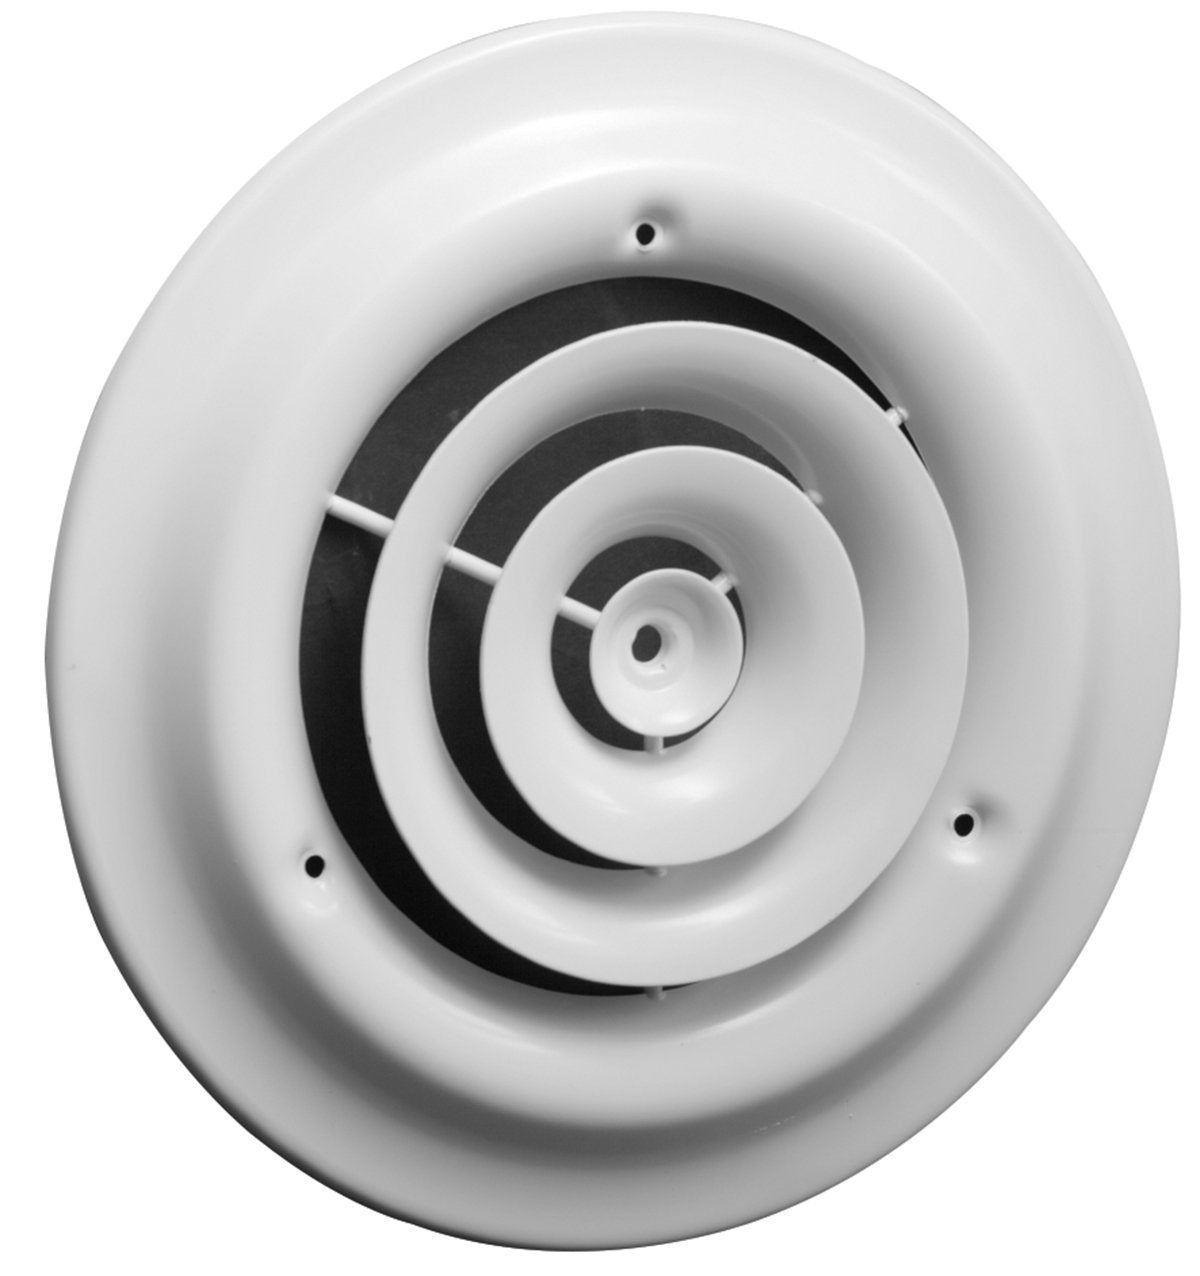 10&quot; Round Ceiling Diffuser - Easy Air Flow - HVAC Duct [White]